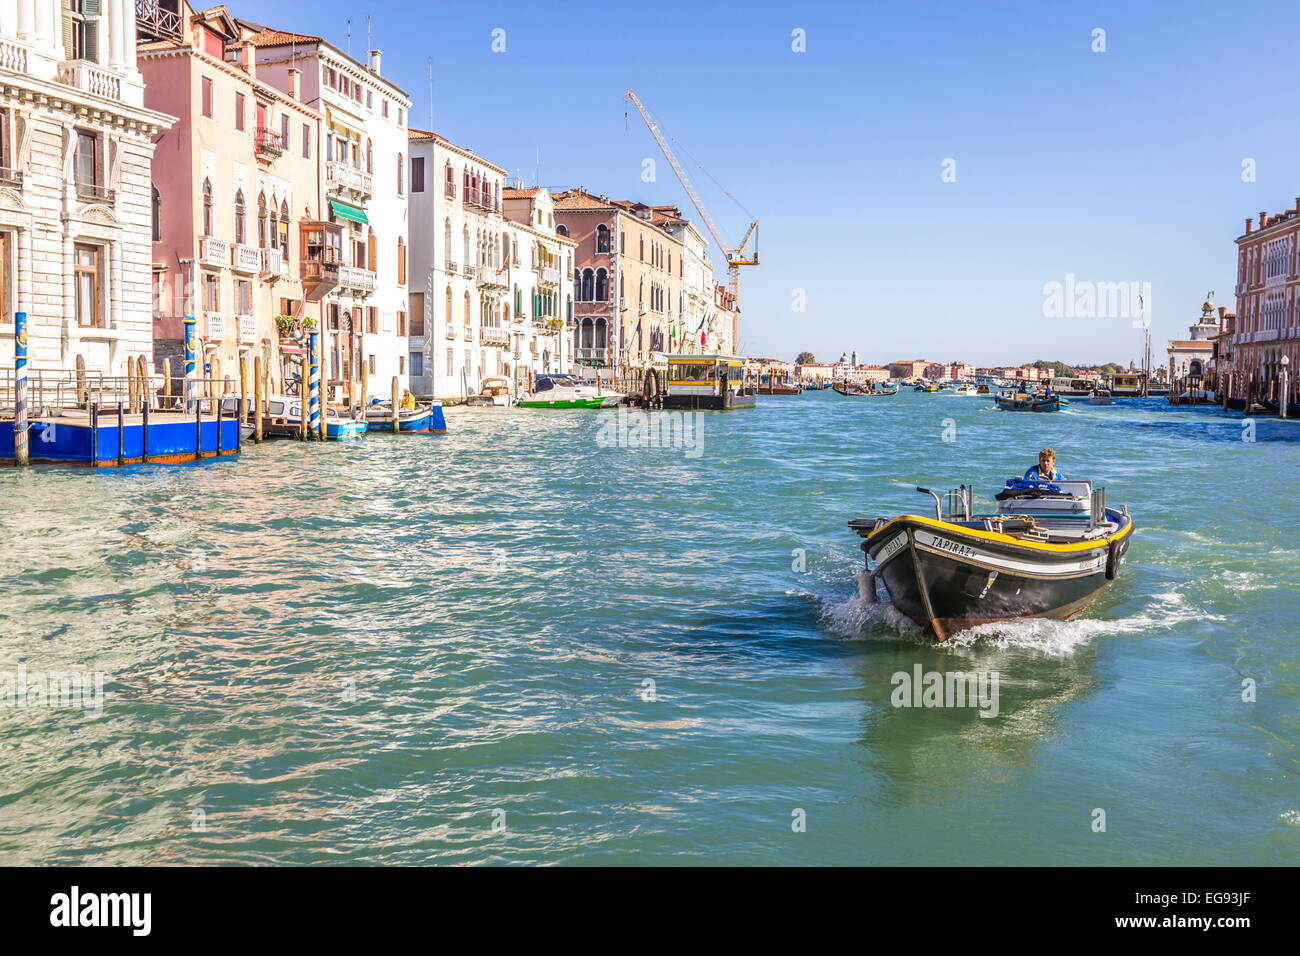 Workboat on canal in Venice Stock Photo